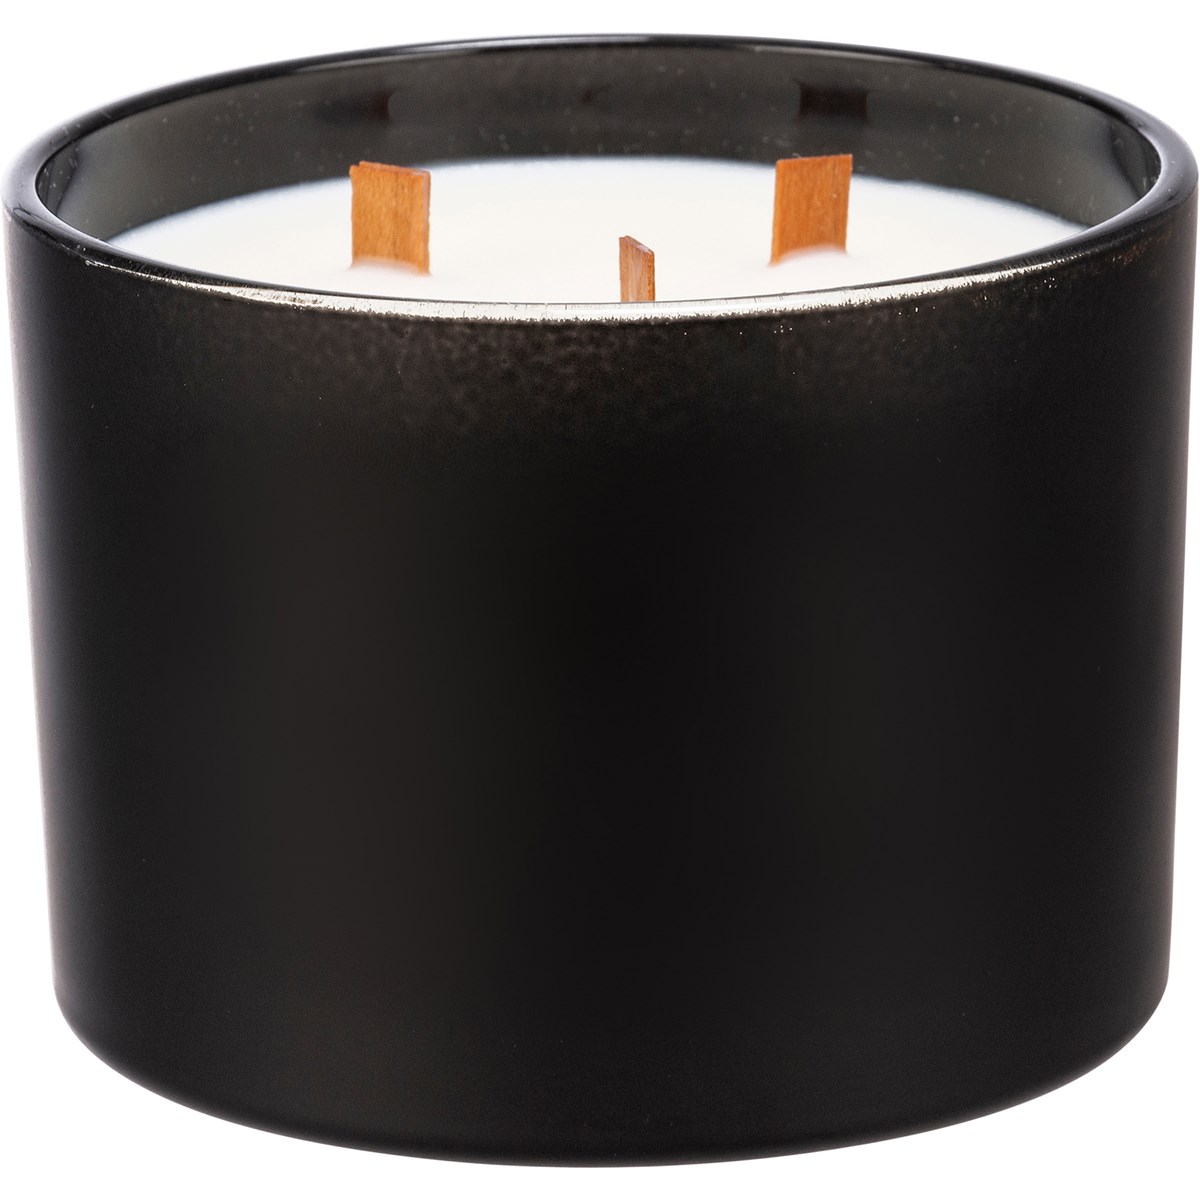 Strength Jar Candle - Soy Wax, Glass, Wood